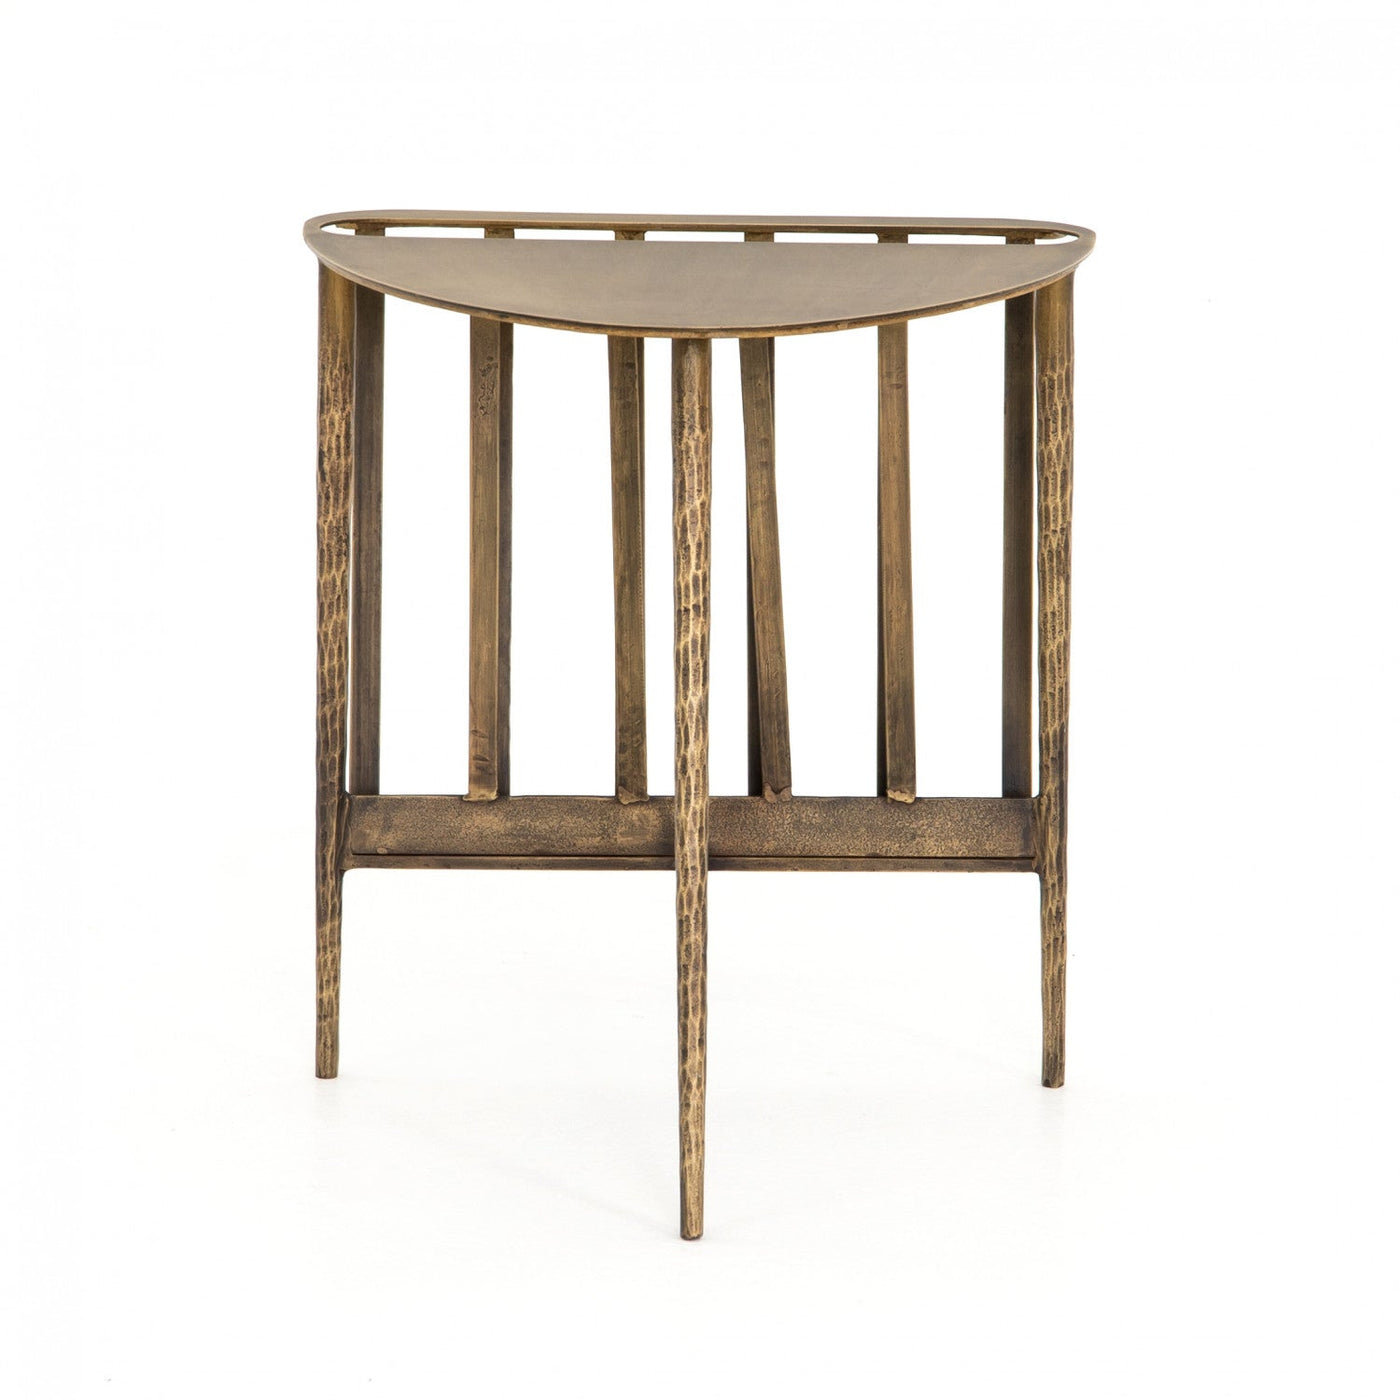 HARRELL END TABLE-AGED BRASS